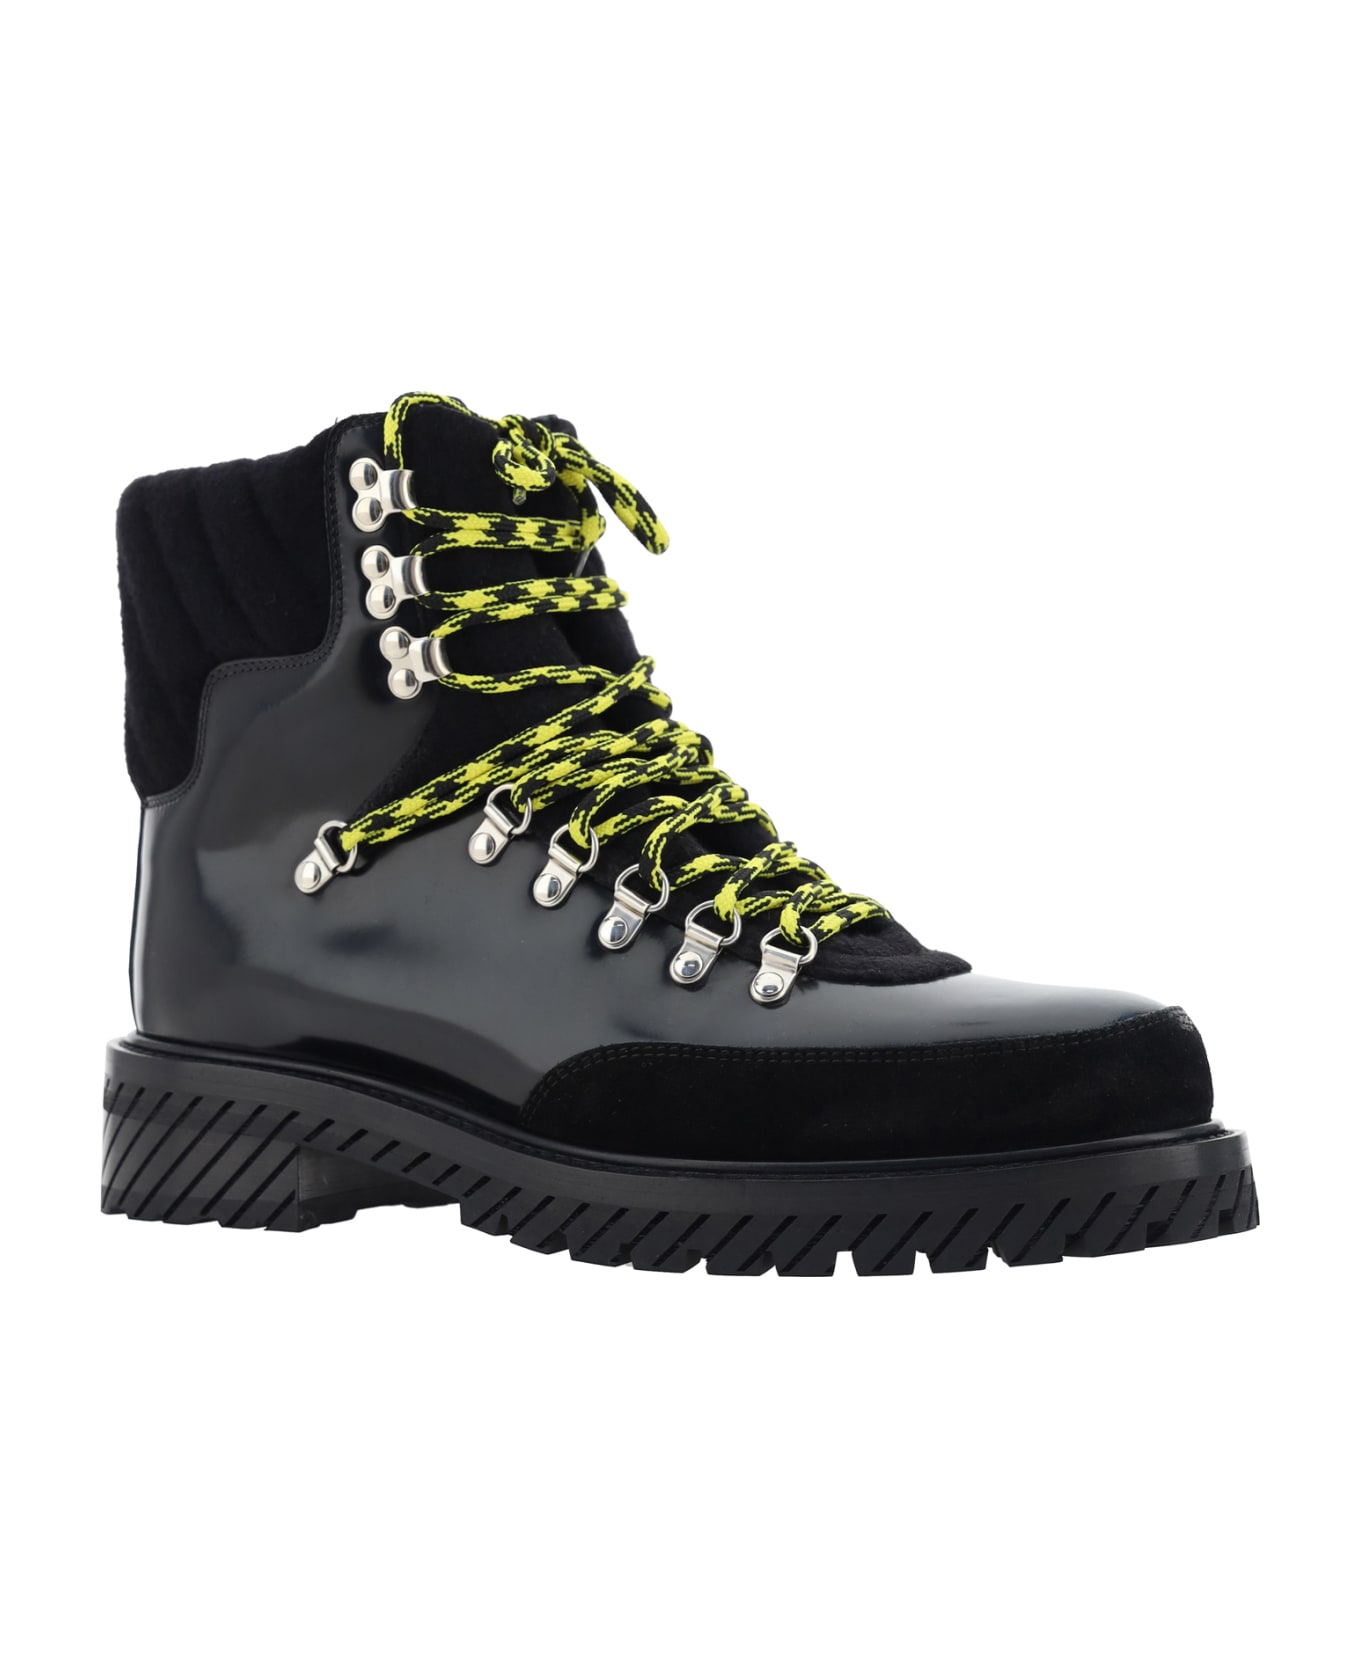 Off-White Gstaad Lace-up Boots - Black Blac